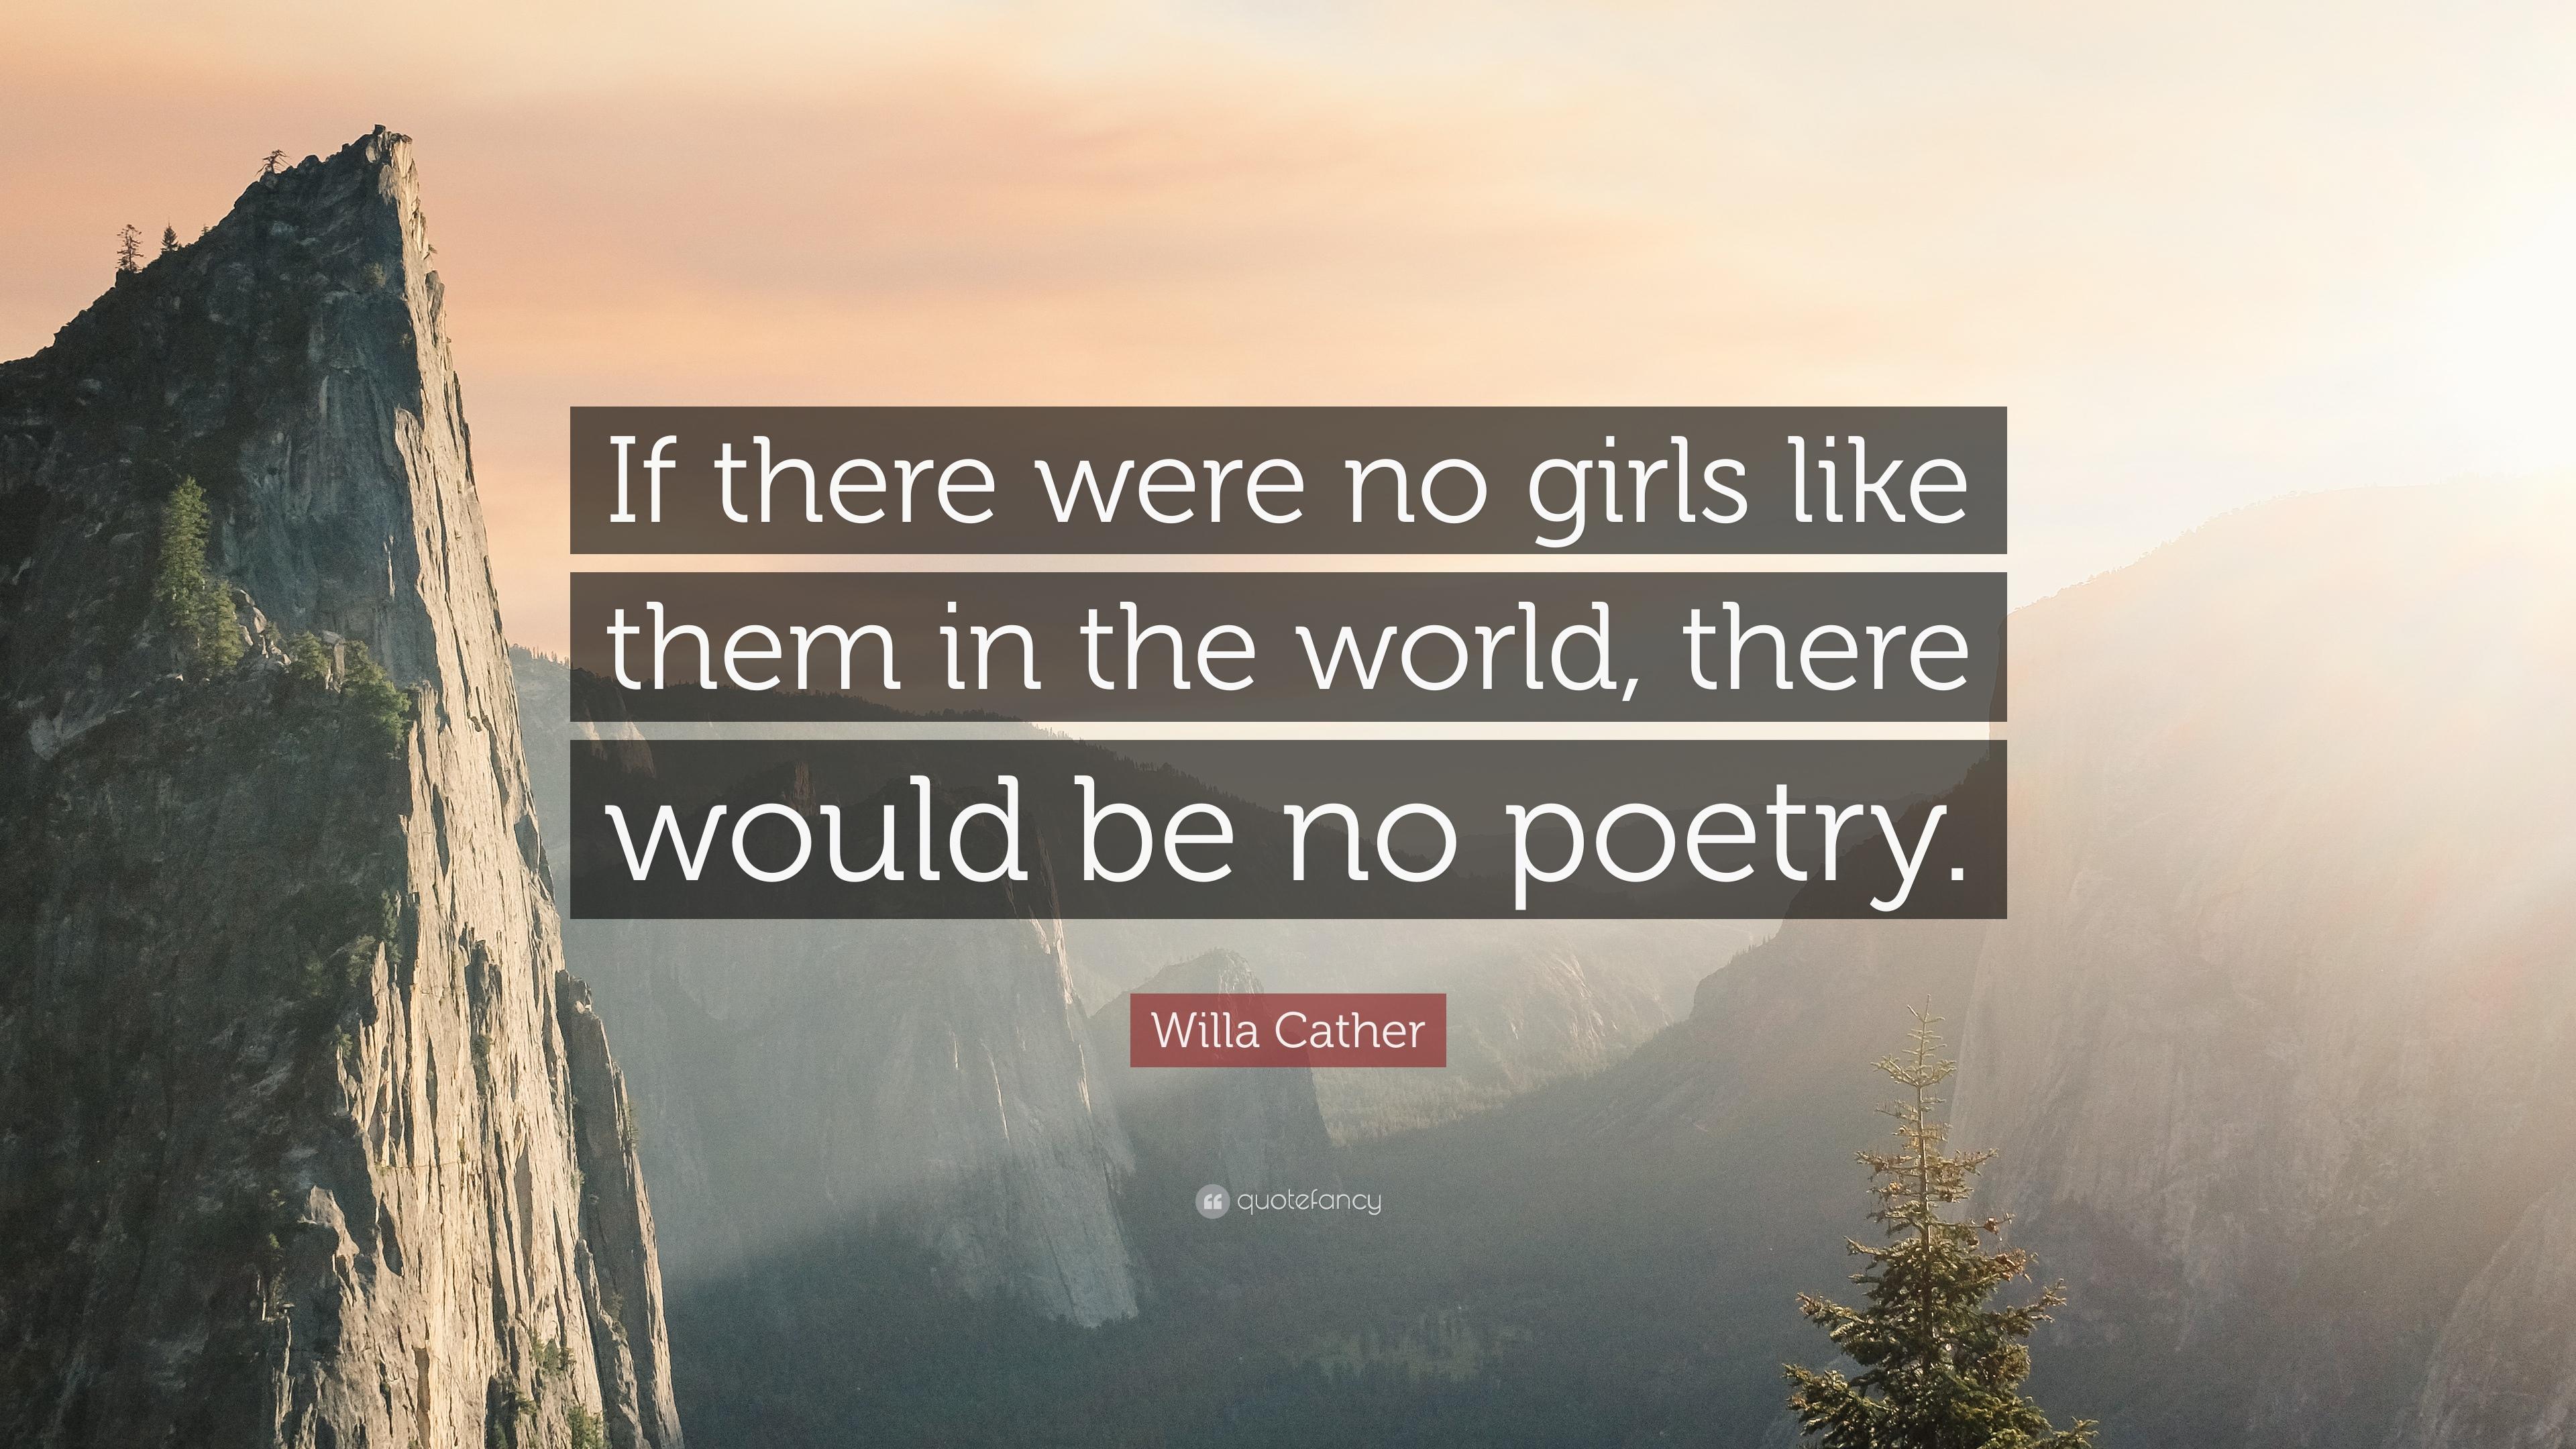 Willa Cather Quote: “If there were no girls like them in the world